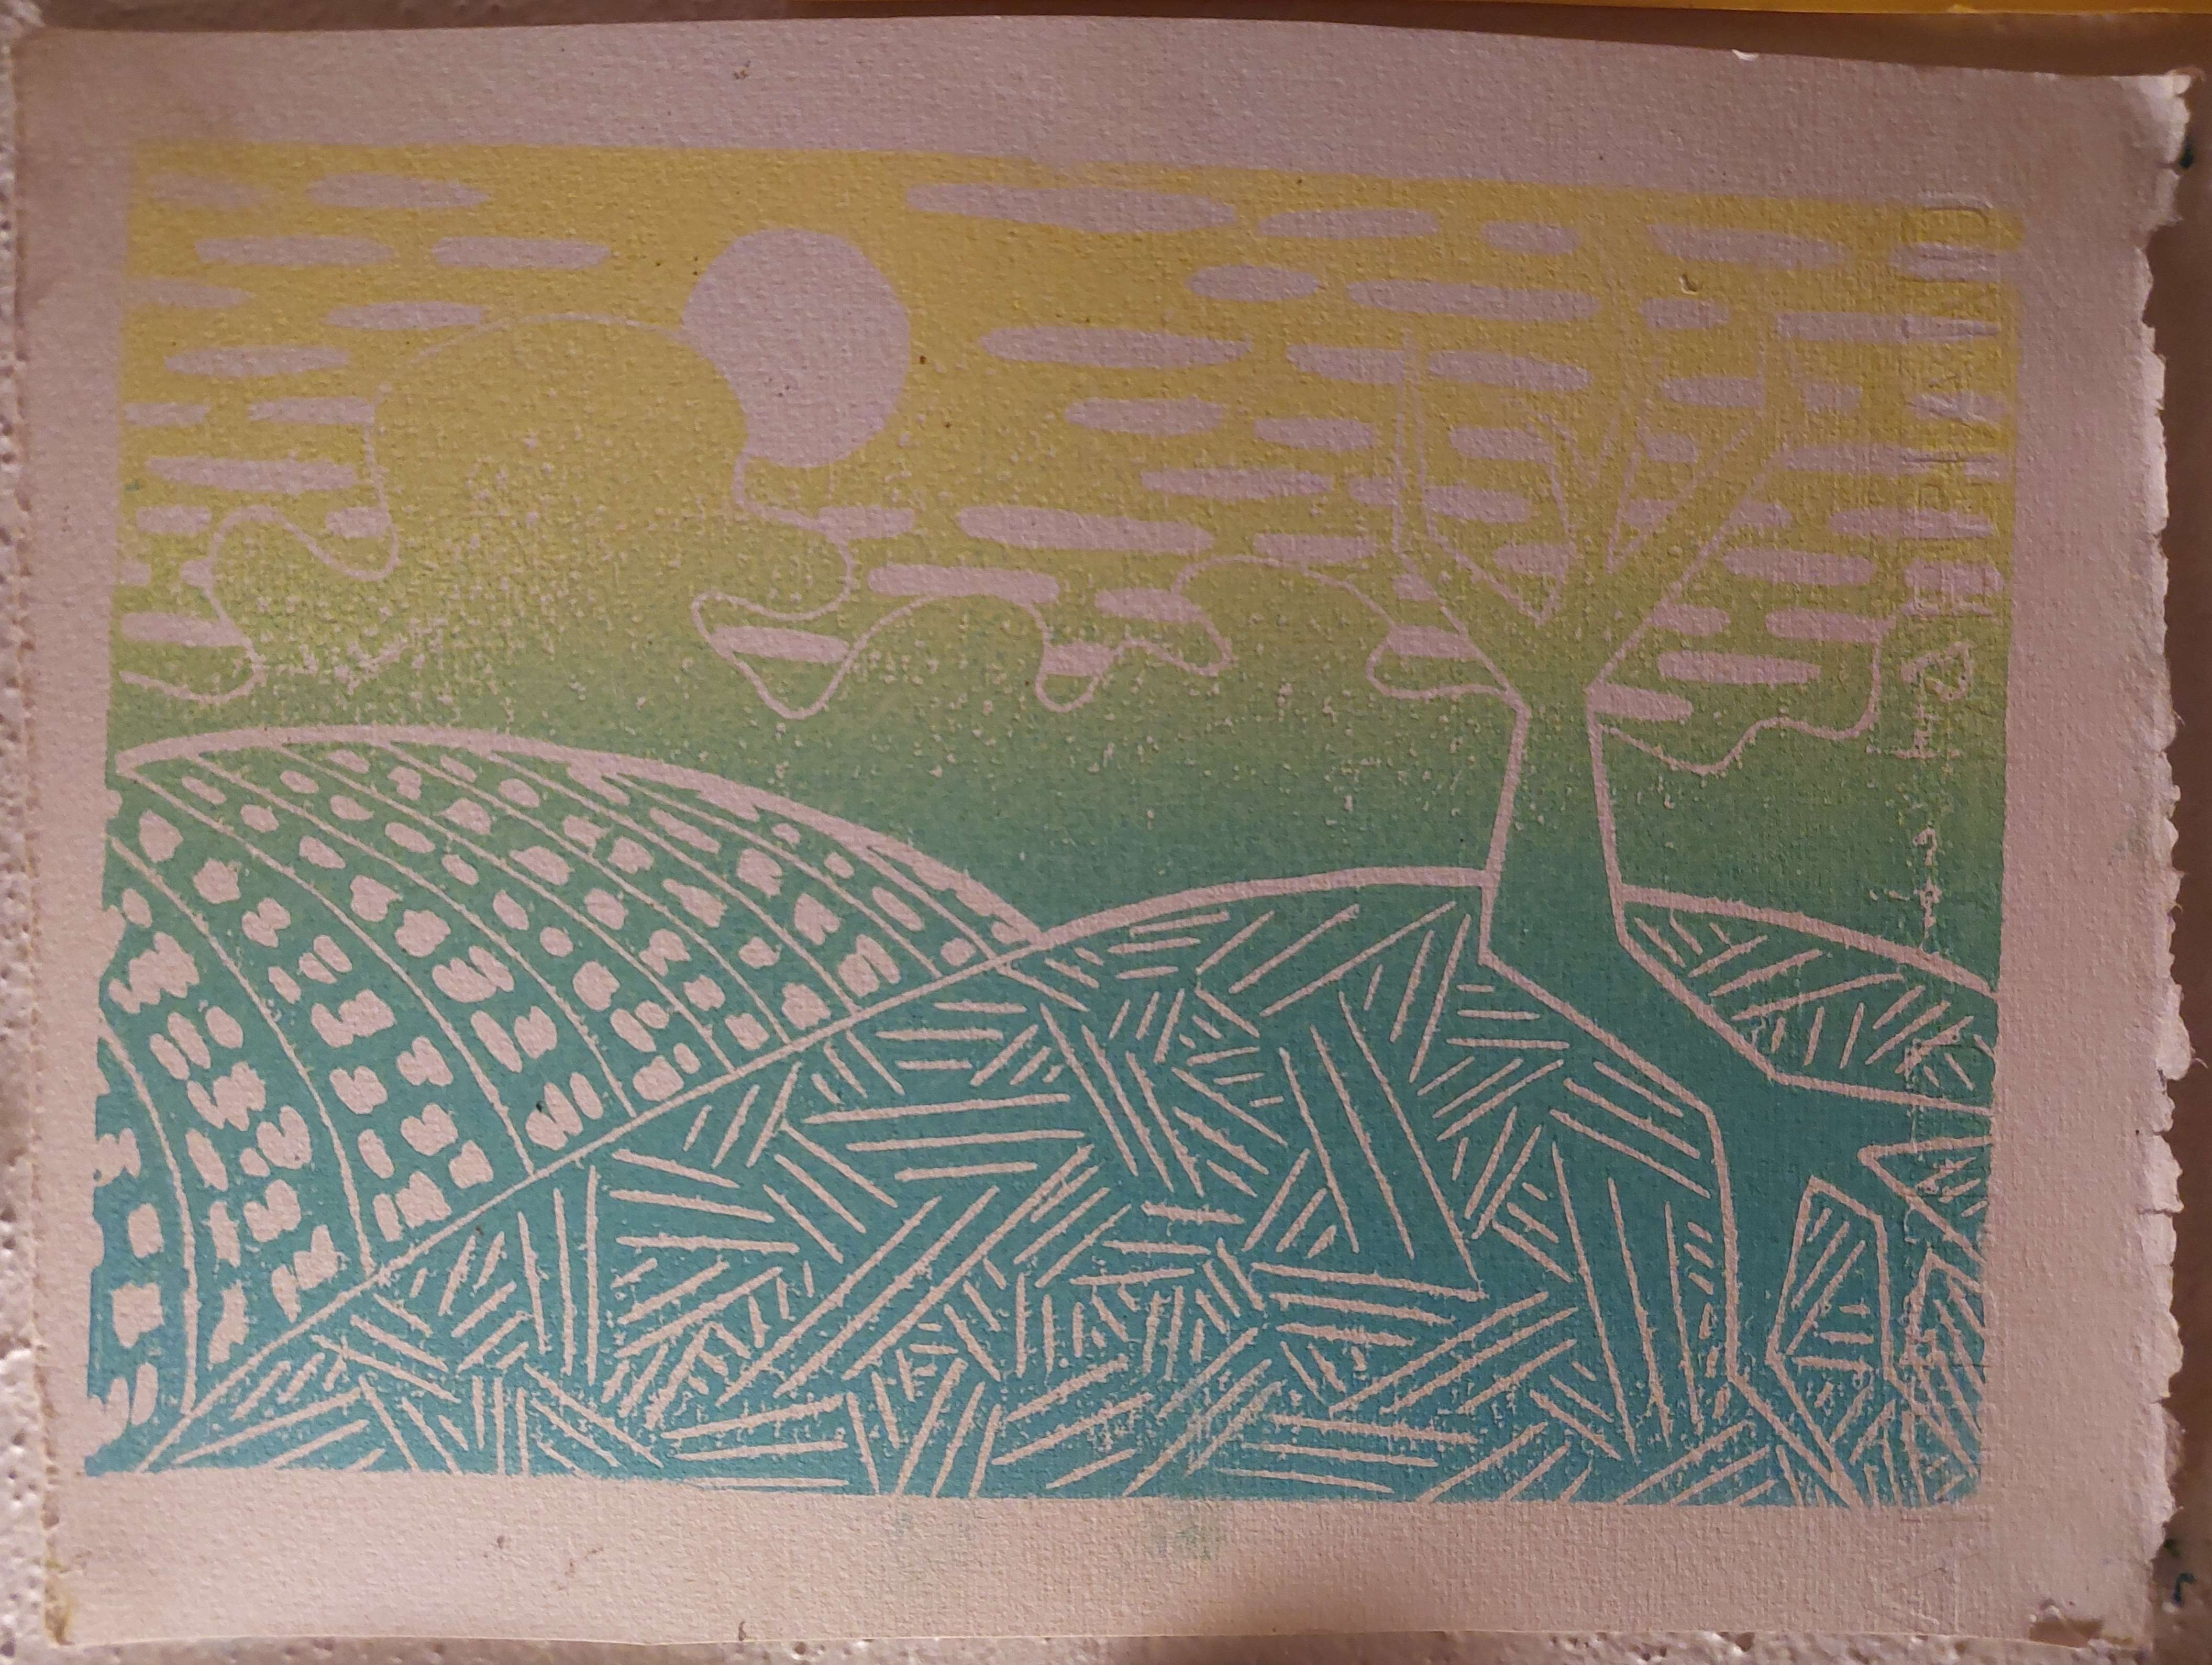 a linoblock print of a sun in the sky over two rolling hills, casting shadows of a barren tree. printed in a yellow-blue gradient, it gives the impression of sun rising into a bright day